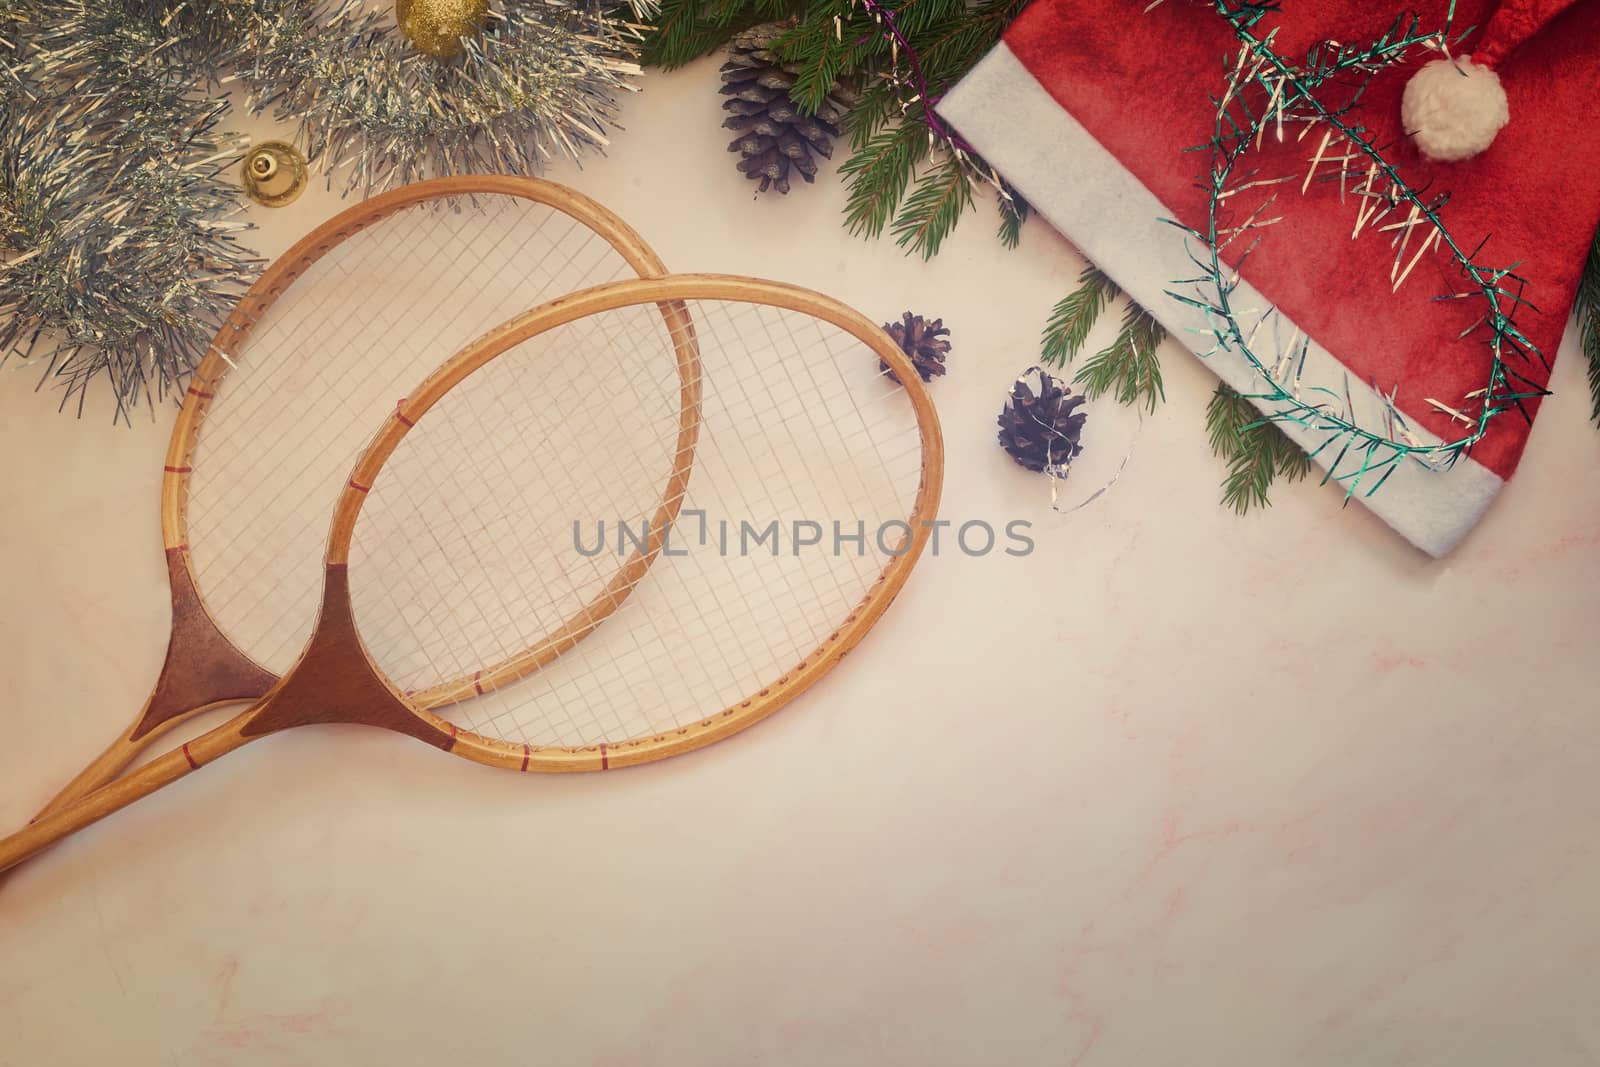 Badminton rackets and Christmas decorations on a light background. Greeting card with the concept of a healthy lifestyle. Top view with copy space. Flat lay